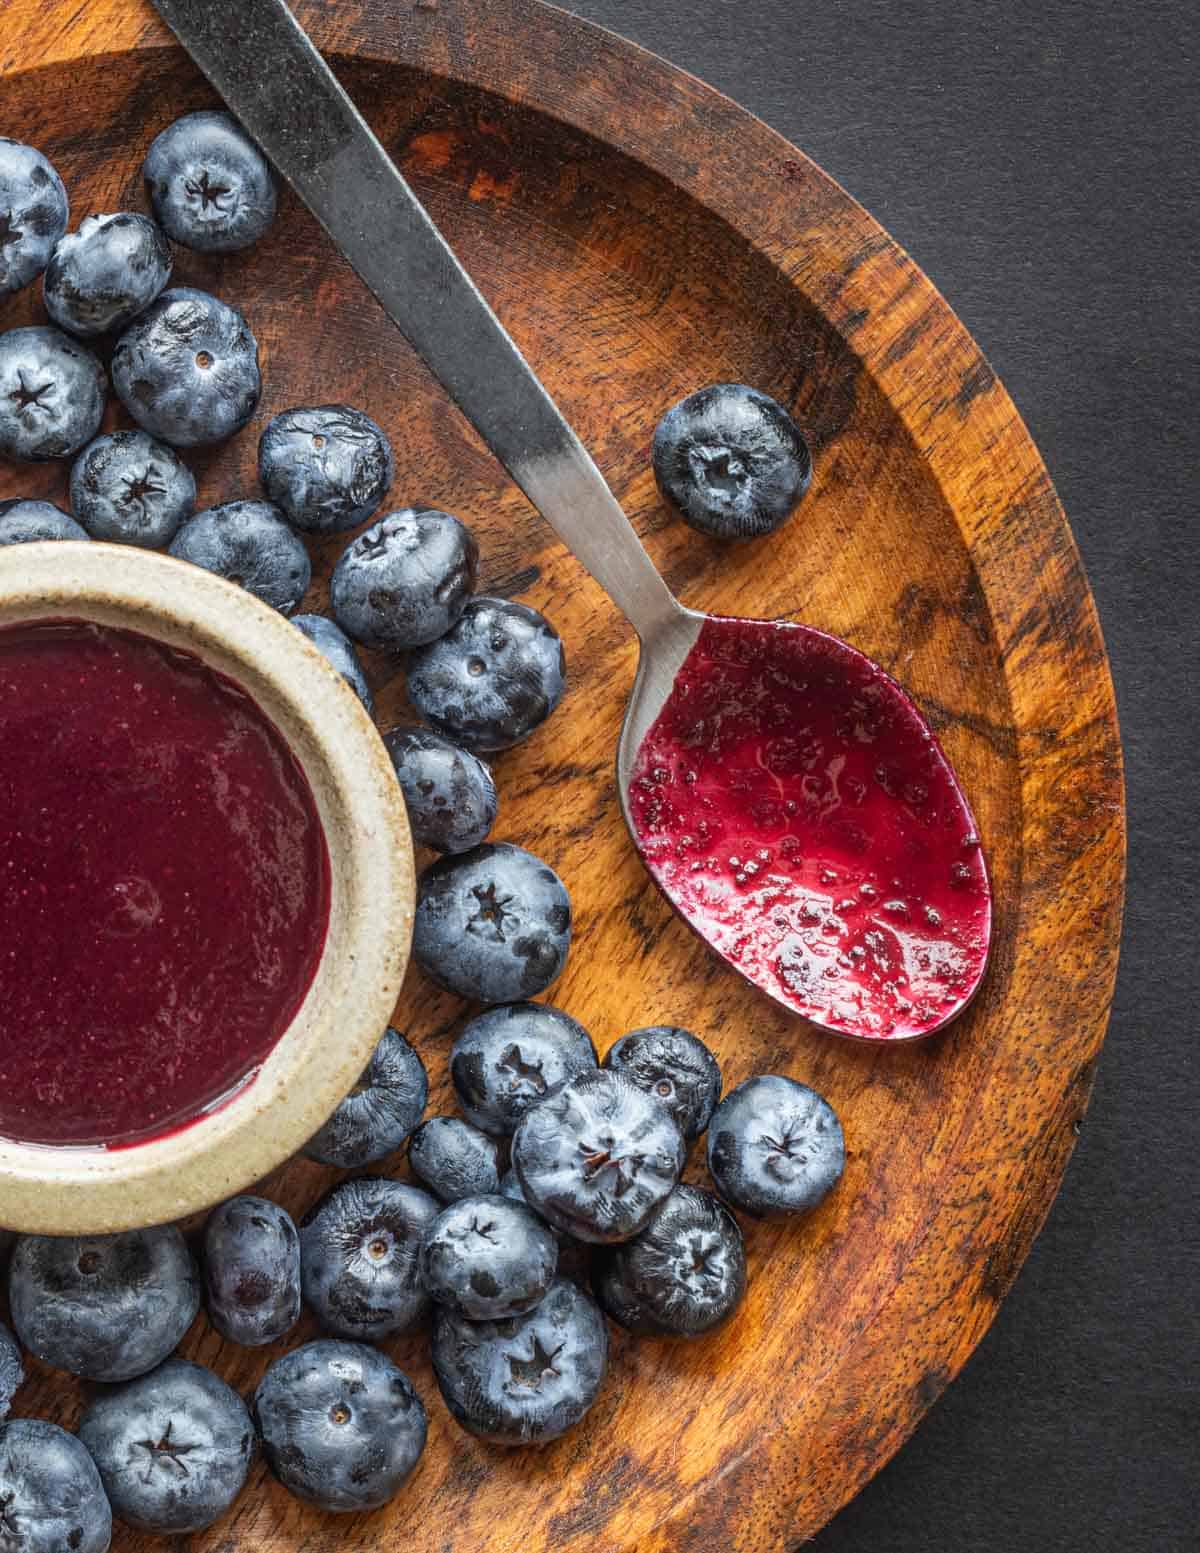 A close up image of a spoon purple with wild blueberry barbecue sauce on a wooden plate next to a bowl of wild blueberry barbecue sauce and fresh blueberries.